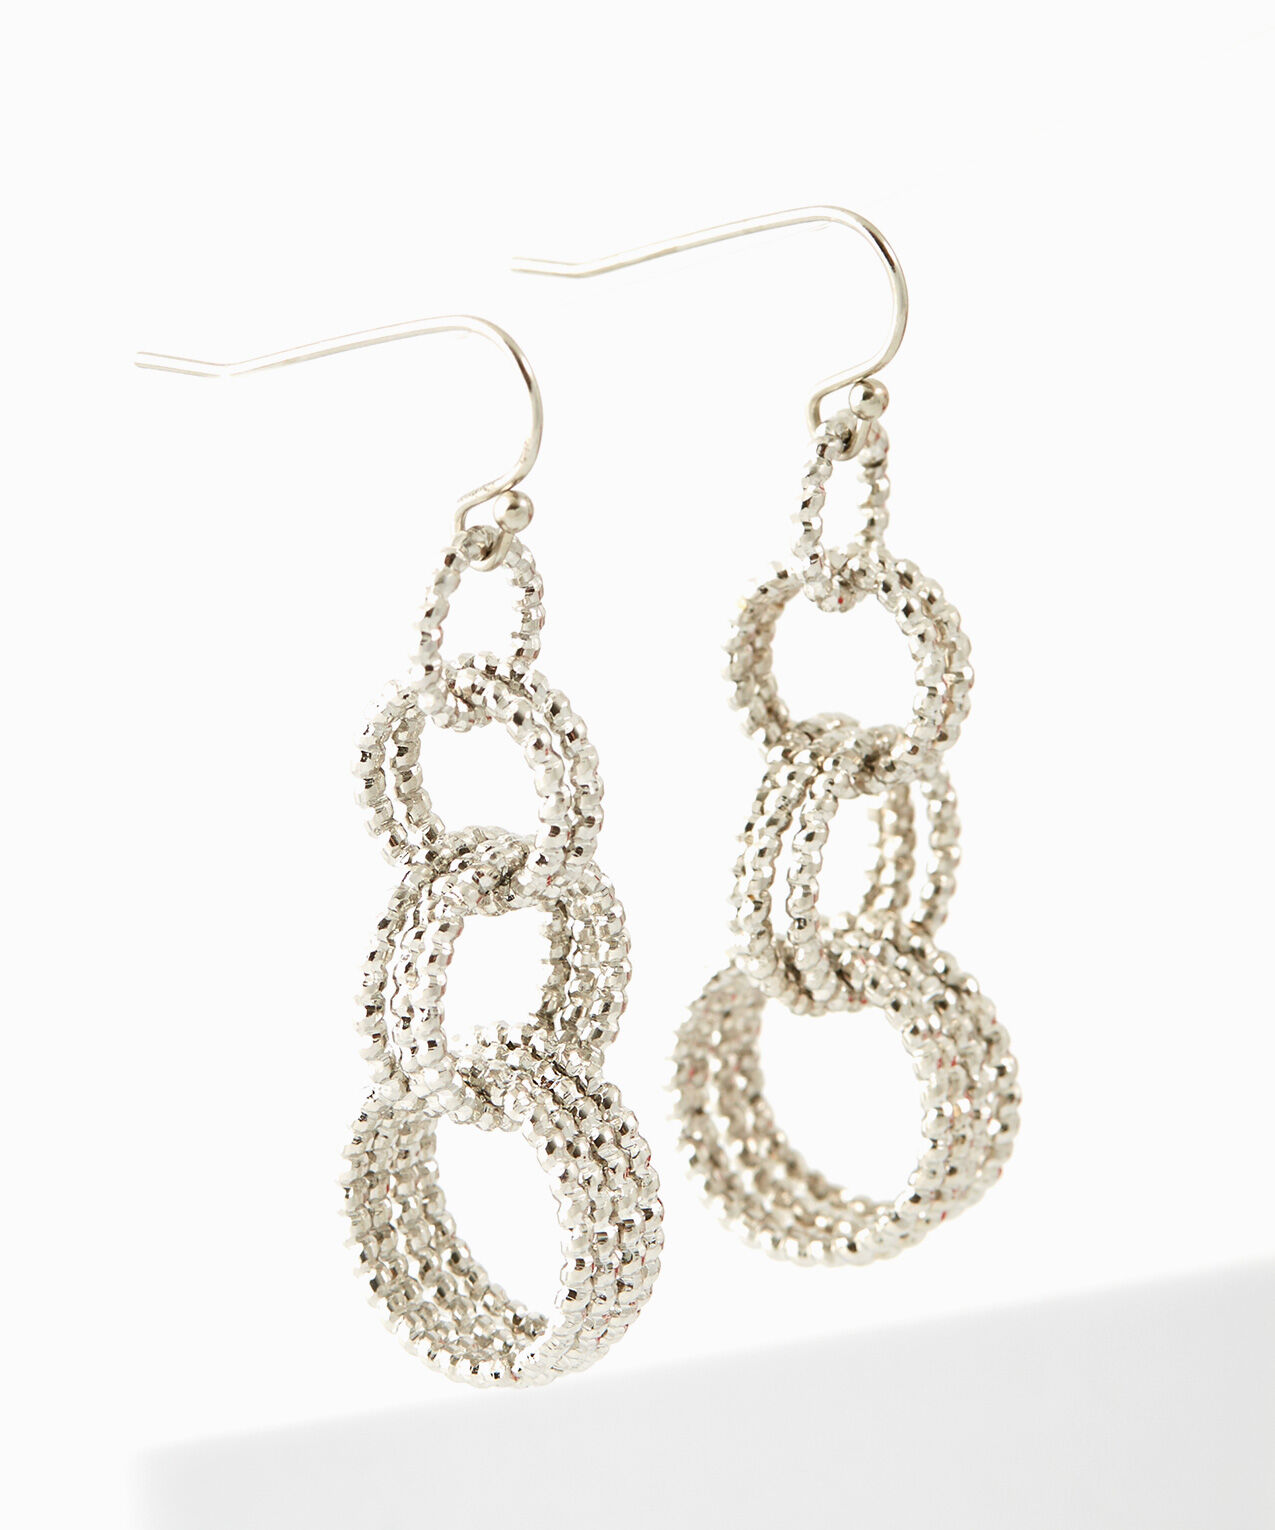 Silver 3-Tiered Ring Earrings